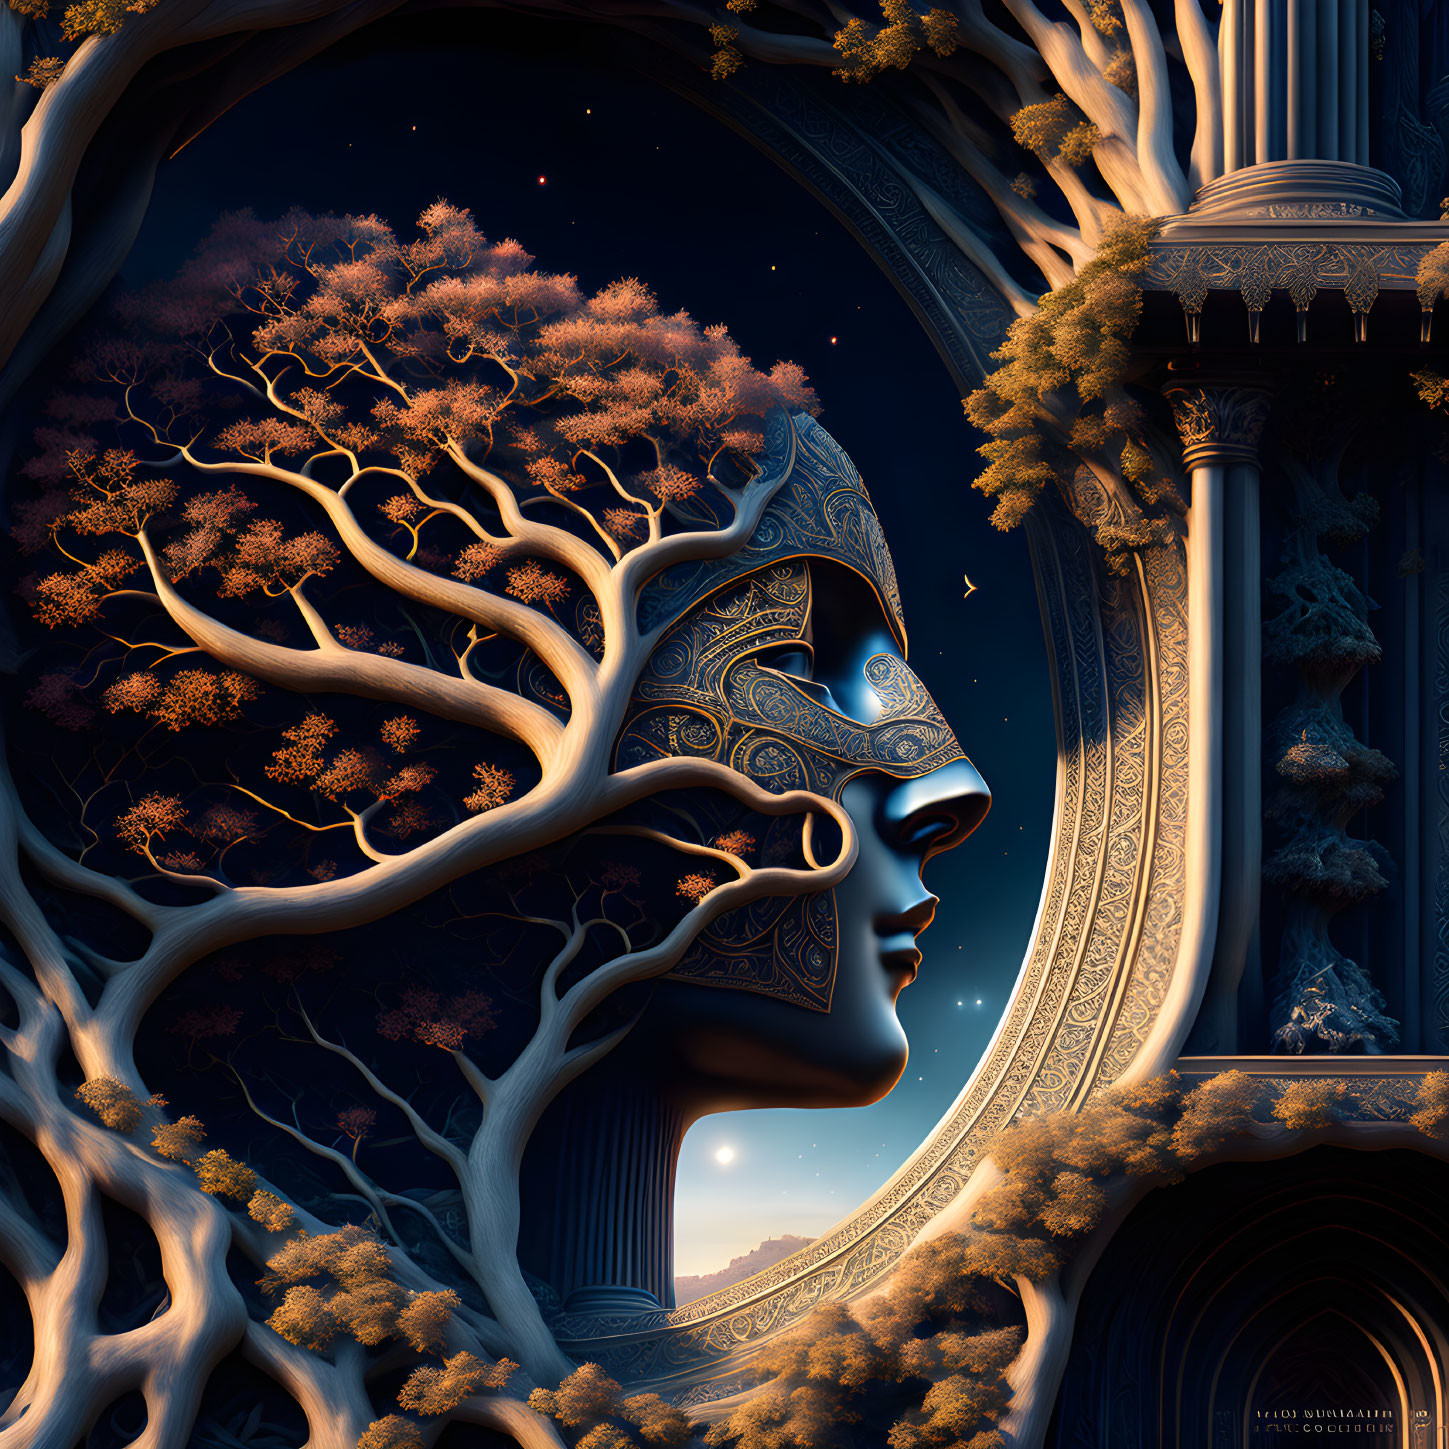 Fantastical female face merged with tree branches under night sky and ornate architecture.